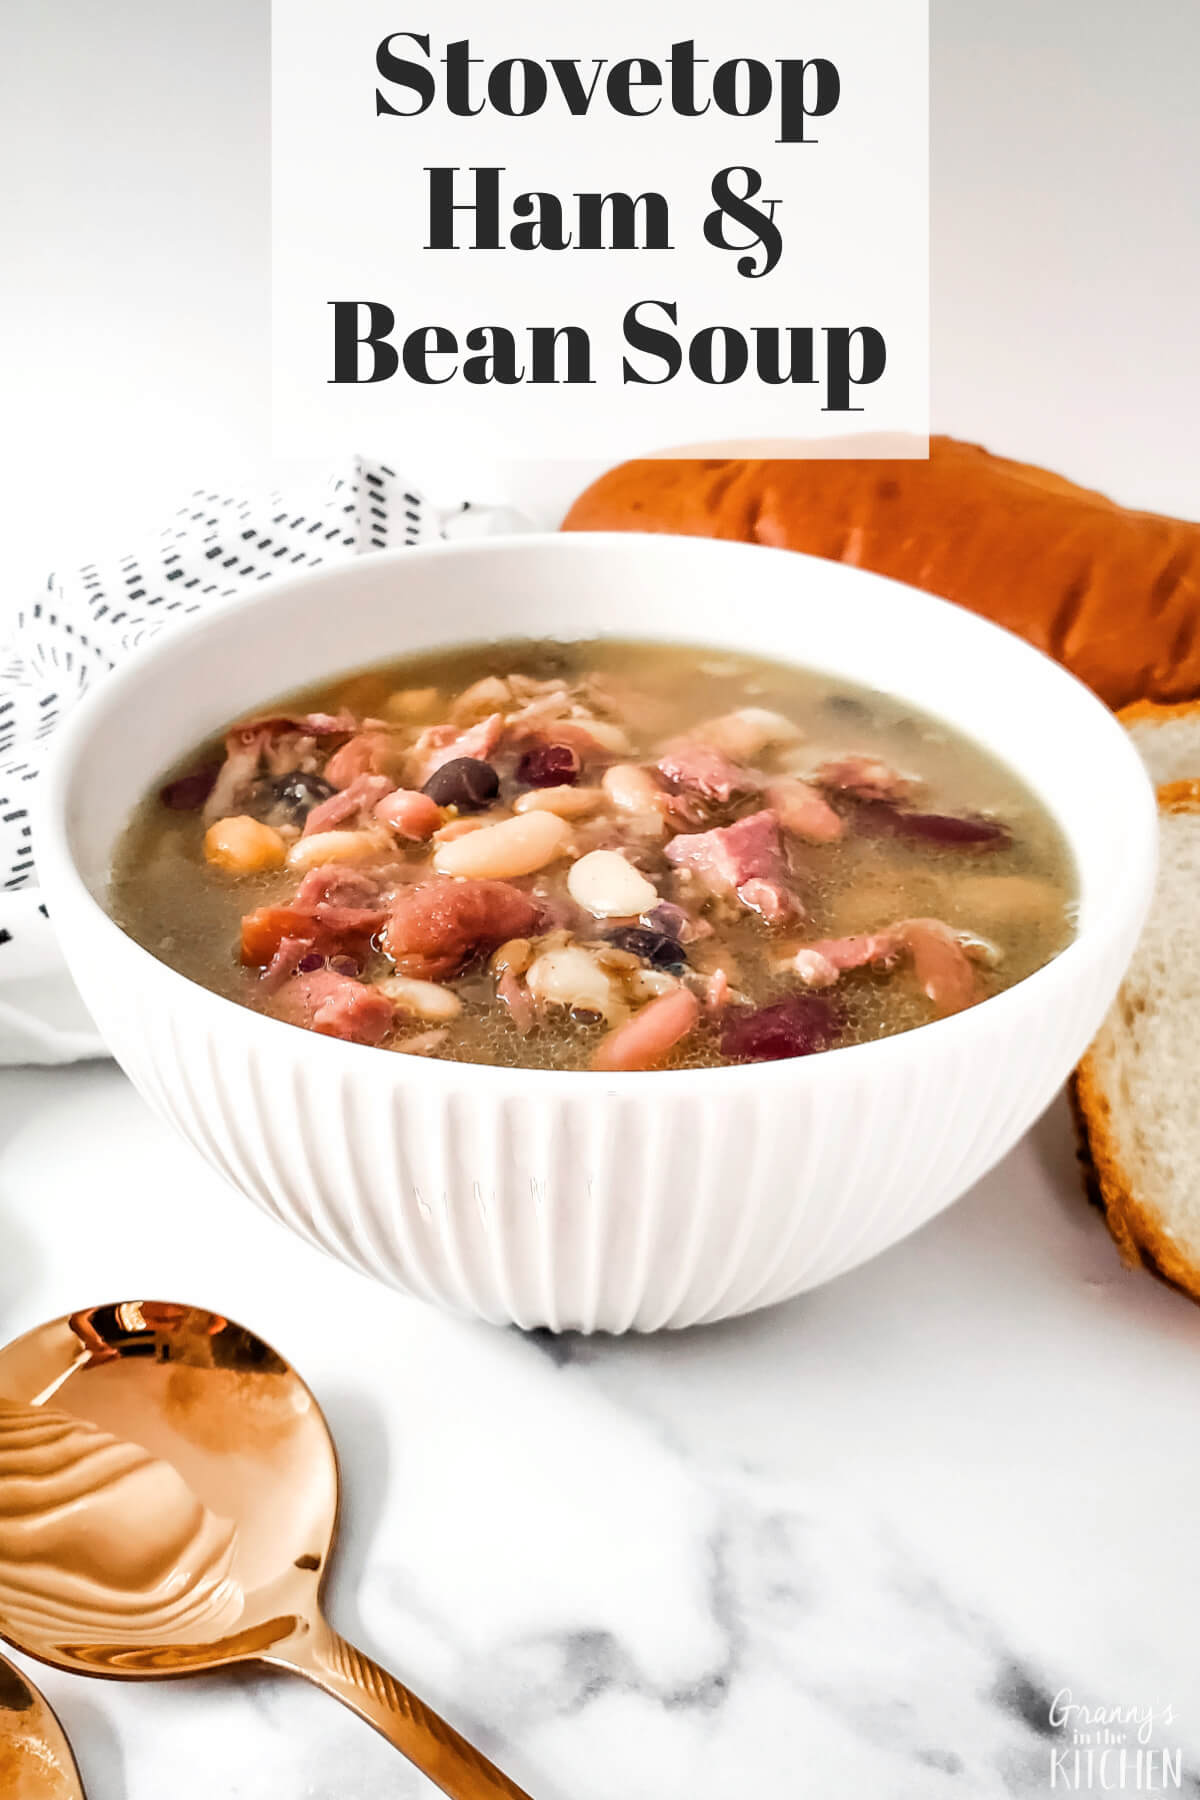 bowl of ham bean soup, with text overlay "Stovetop Ham & Bean Soup"